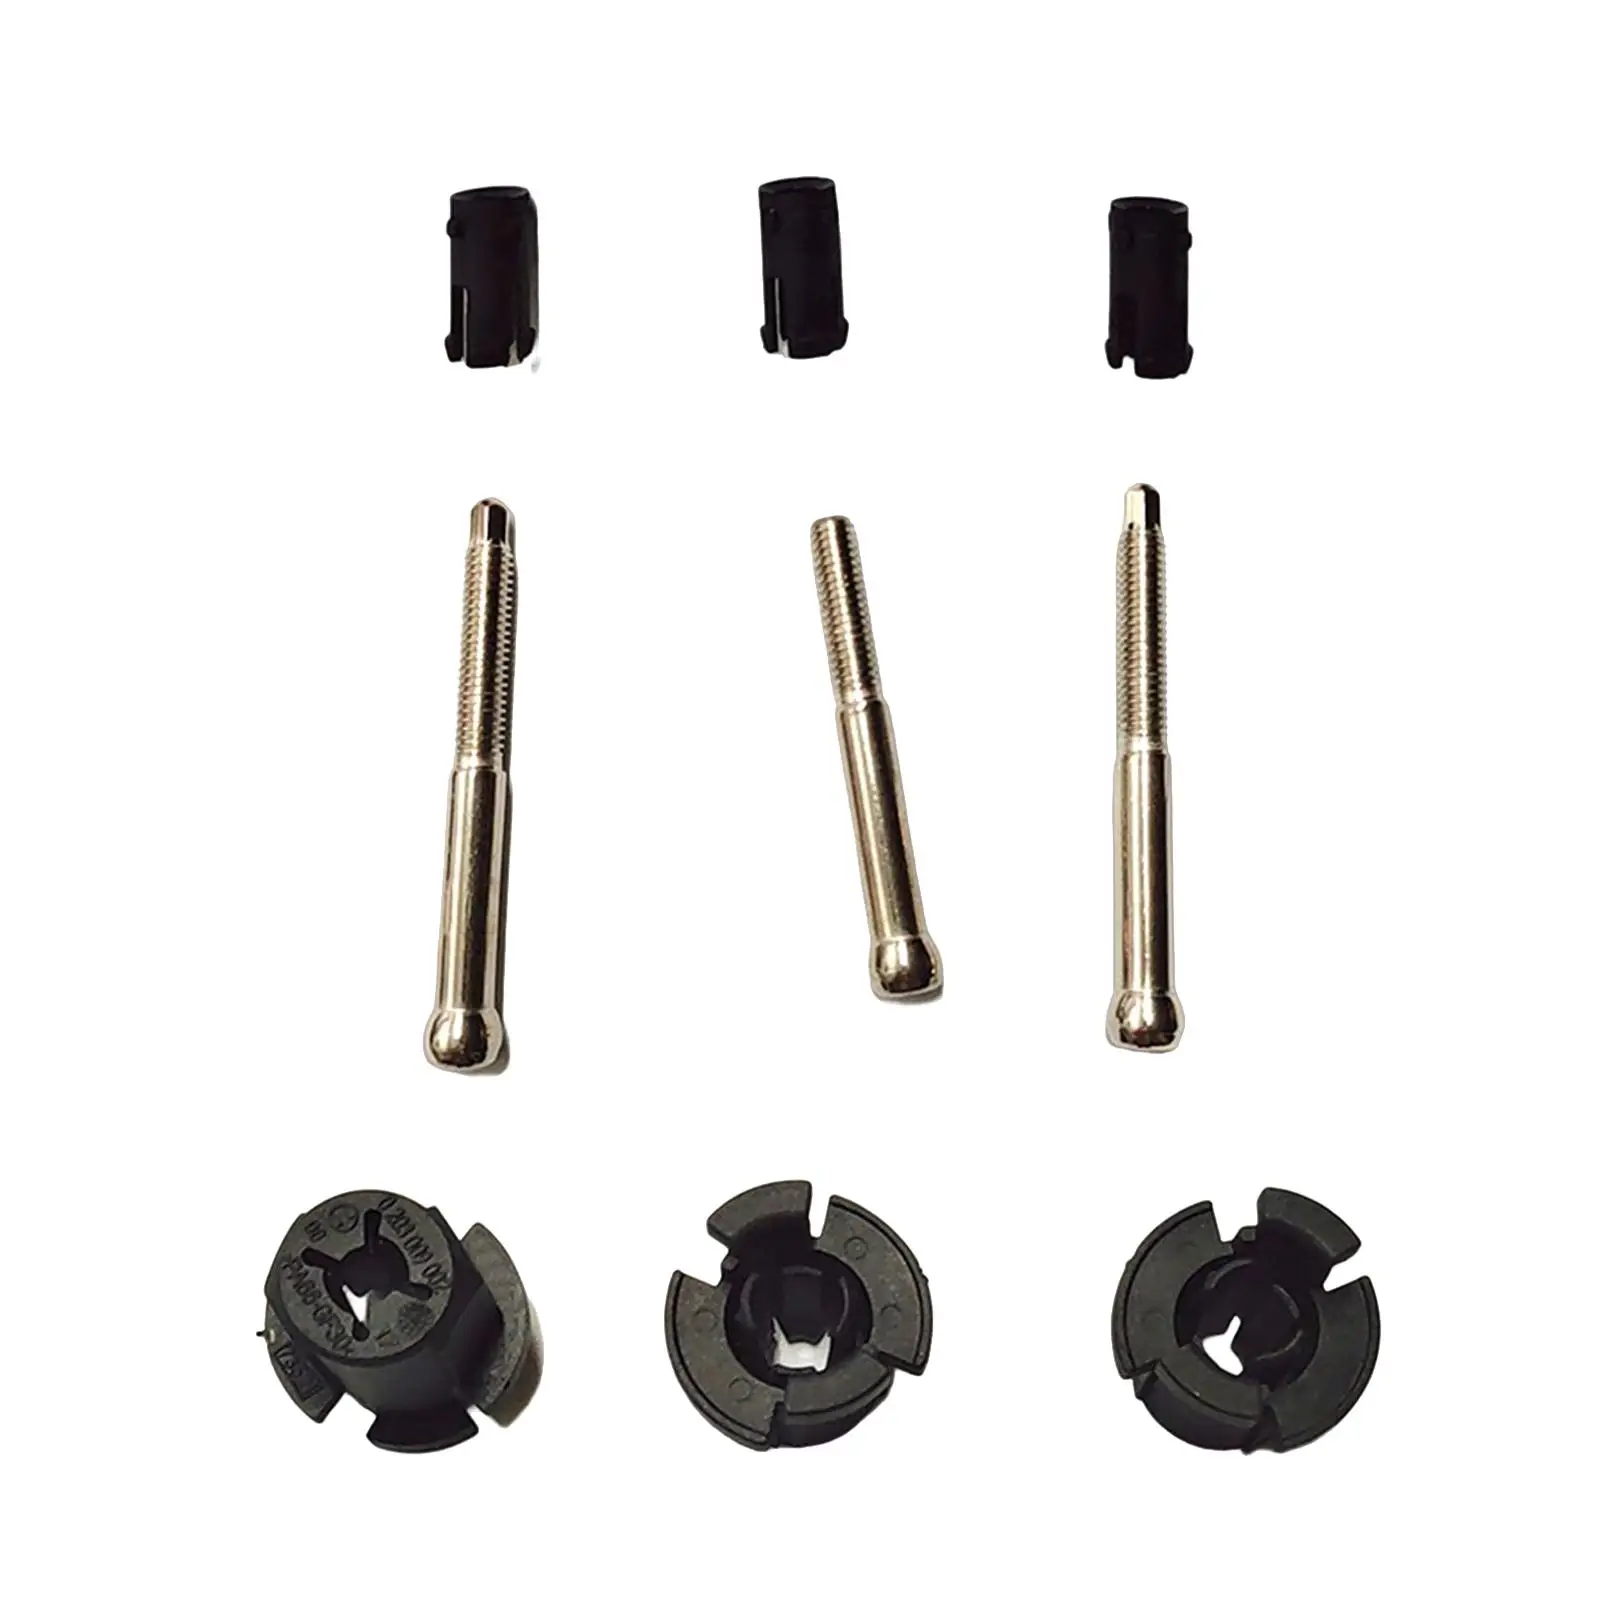 Cruise Control Distance Sensor Mounting Repair Kit for Audi A6L C7